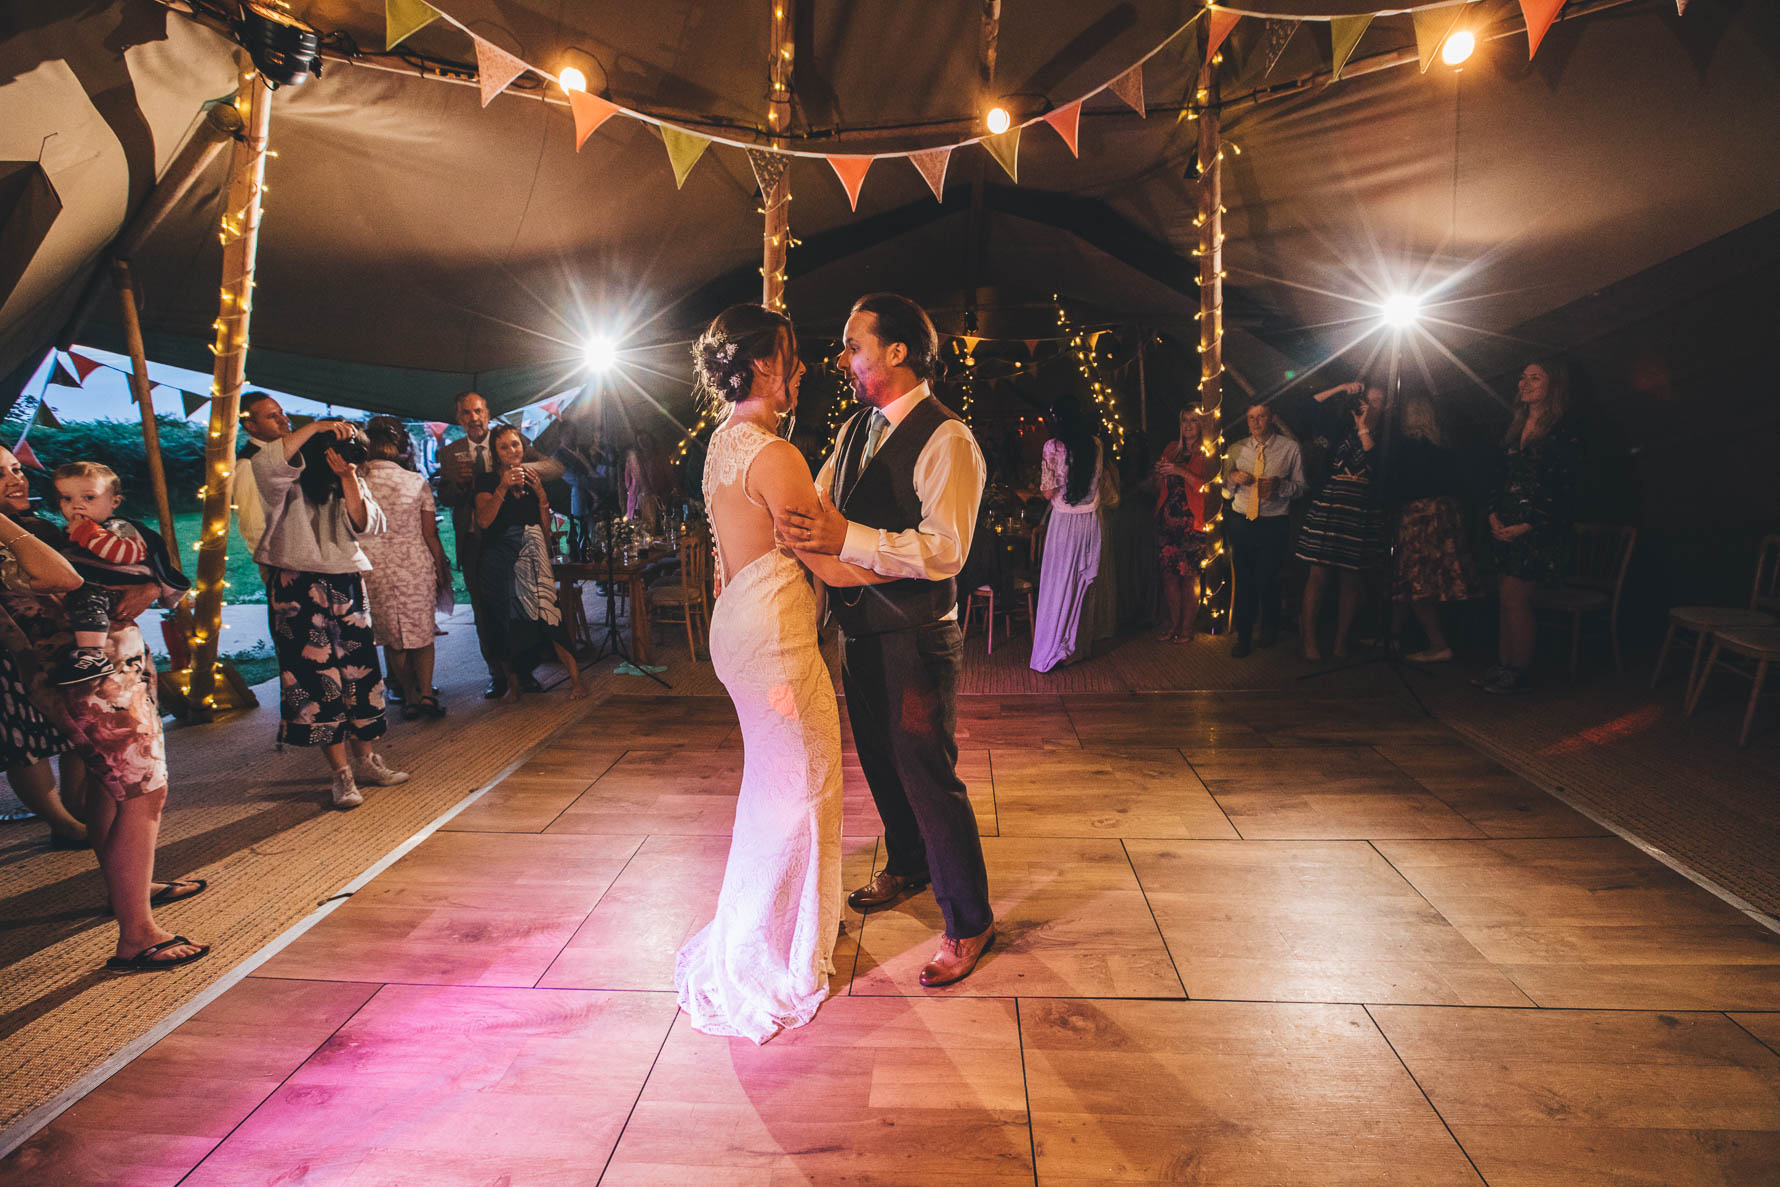 Bride and Groom with their arms around each others waist during their first dance inside a tipi with bunting and fairylights in the background